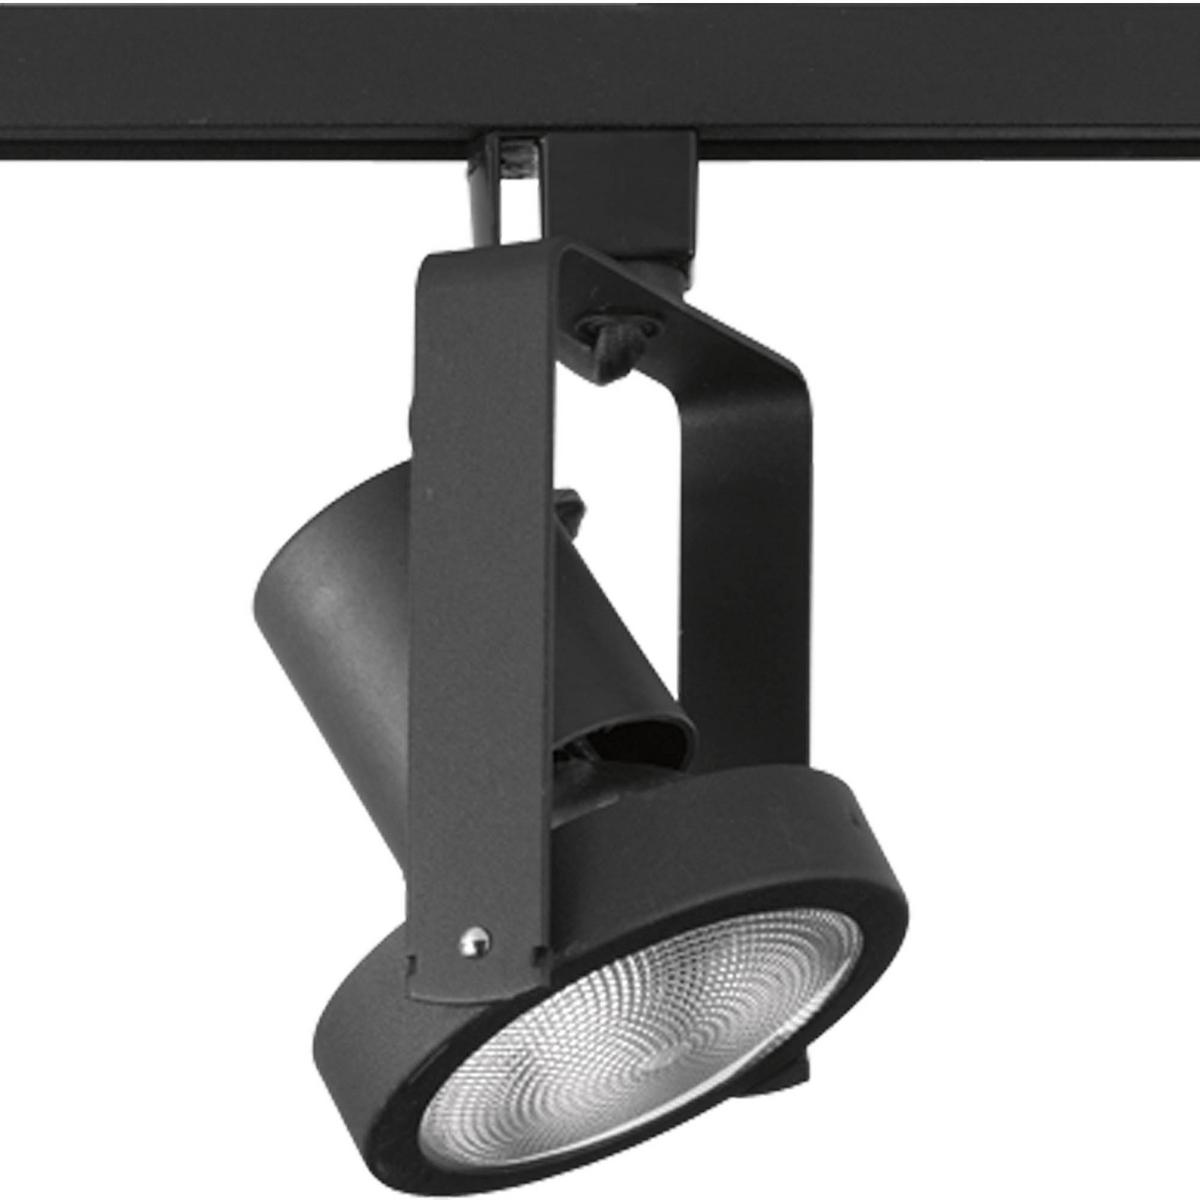 Hubbell P6327-31 Black high tech Alpha Trak track head with 360 degree horizontal rotation and 90 degree vertical rotation. Heads can be easily repositioned on the track to provide lighting in different areas of the room. Excellent for both residential and retail location